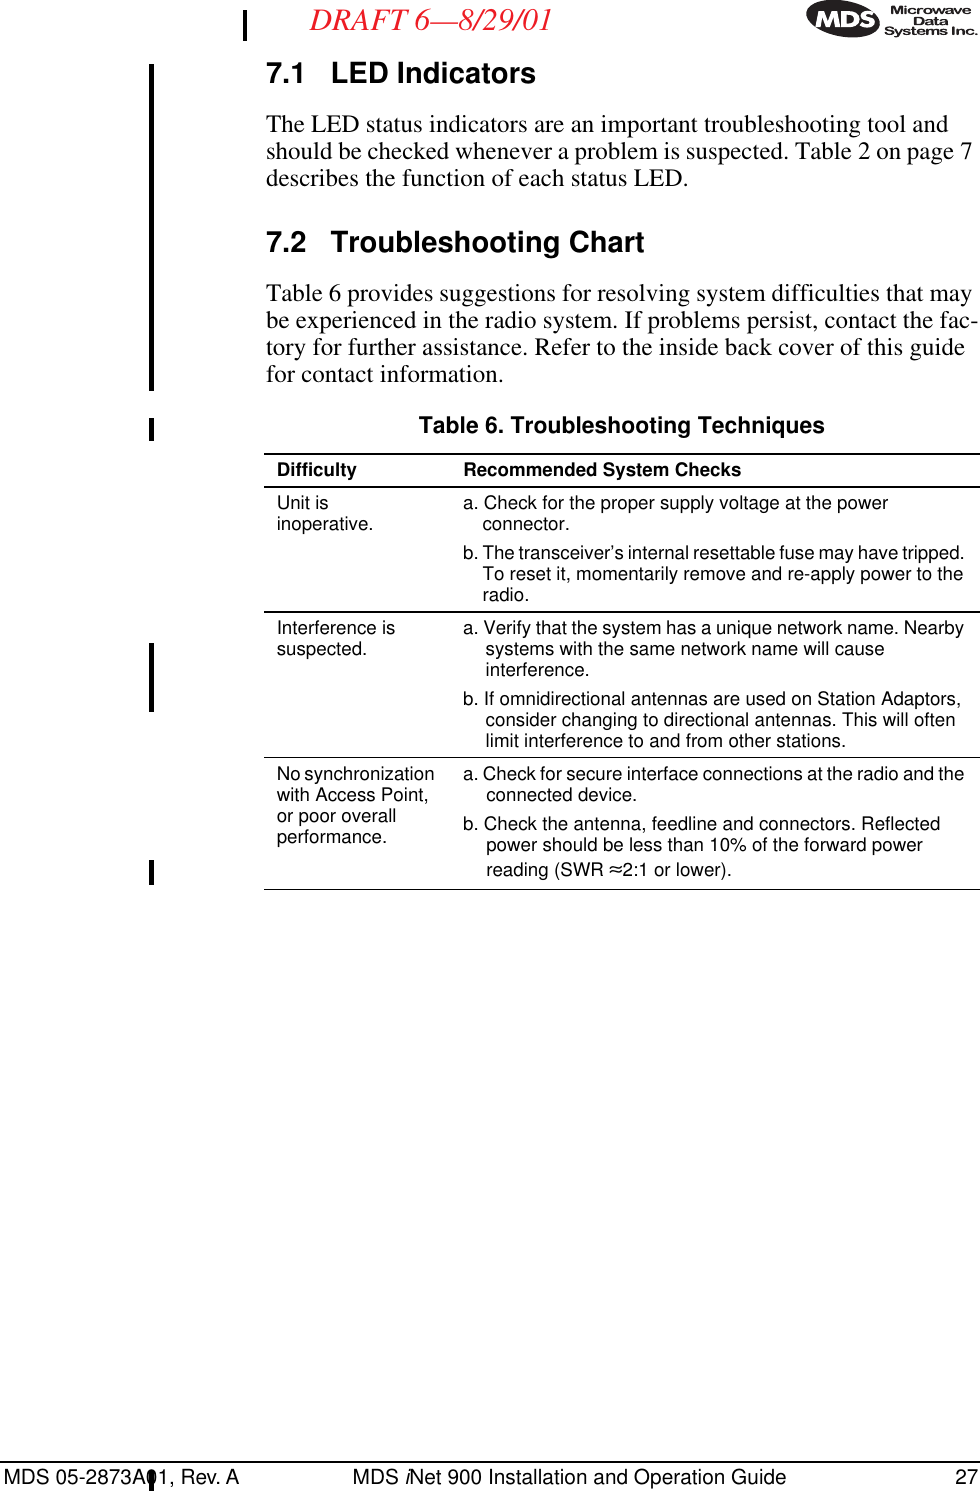 MDS 05-2873A01, Rev. A MDS iNet 900 Installation and Operation Guide 27DRAFT 6—8/29/017.1 LED IndicatorsThe LED status indicators are an important troubleshooting tool and should be checked whenever a problem is suspected. Table 2 on page 7 describes the function of each status LED.7.2 Troubleshooting ChartTable 6 provides suggestions for resolving system difficulties that may be experienced in the radio system. If problems persist, contact the fac-tory for further assistance. Refer to the inside back cover of this guide for contact information.Table 6. Troubleshooting TechniquesDifficulty Recommended System ChecksUnit isinoperative. a. Check for the proper supply voltage at the power connector.b. The transceiver’s internal resettable fuse may have tripped. To reset it, momentarily remove and re-apply power to the radio.Interference is suspected. a. Verify that the system has a unique network name. Nearby systems with the same network name will cause interference.b. If omnidirectional antennas are used on Station Adaptors, consider changing to directional antennas. This will often limit interference to and from other stations.No synchronization with Access Point, or poor overall performance.a. Check for secure interface connections at the radio and the connected device.b. Check the antenna, feedline and connectors. Reflected power should be less than 10% of the forward power reading (SWR ≈2:1 or lower).